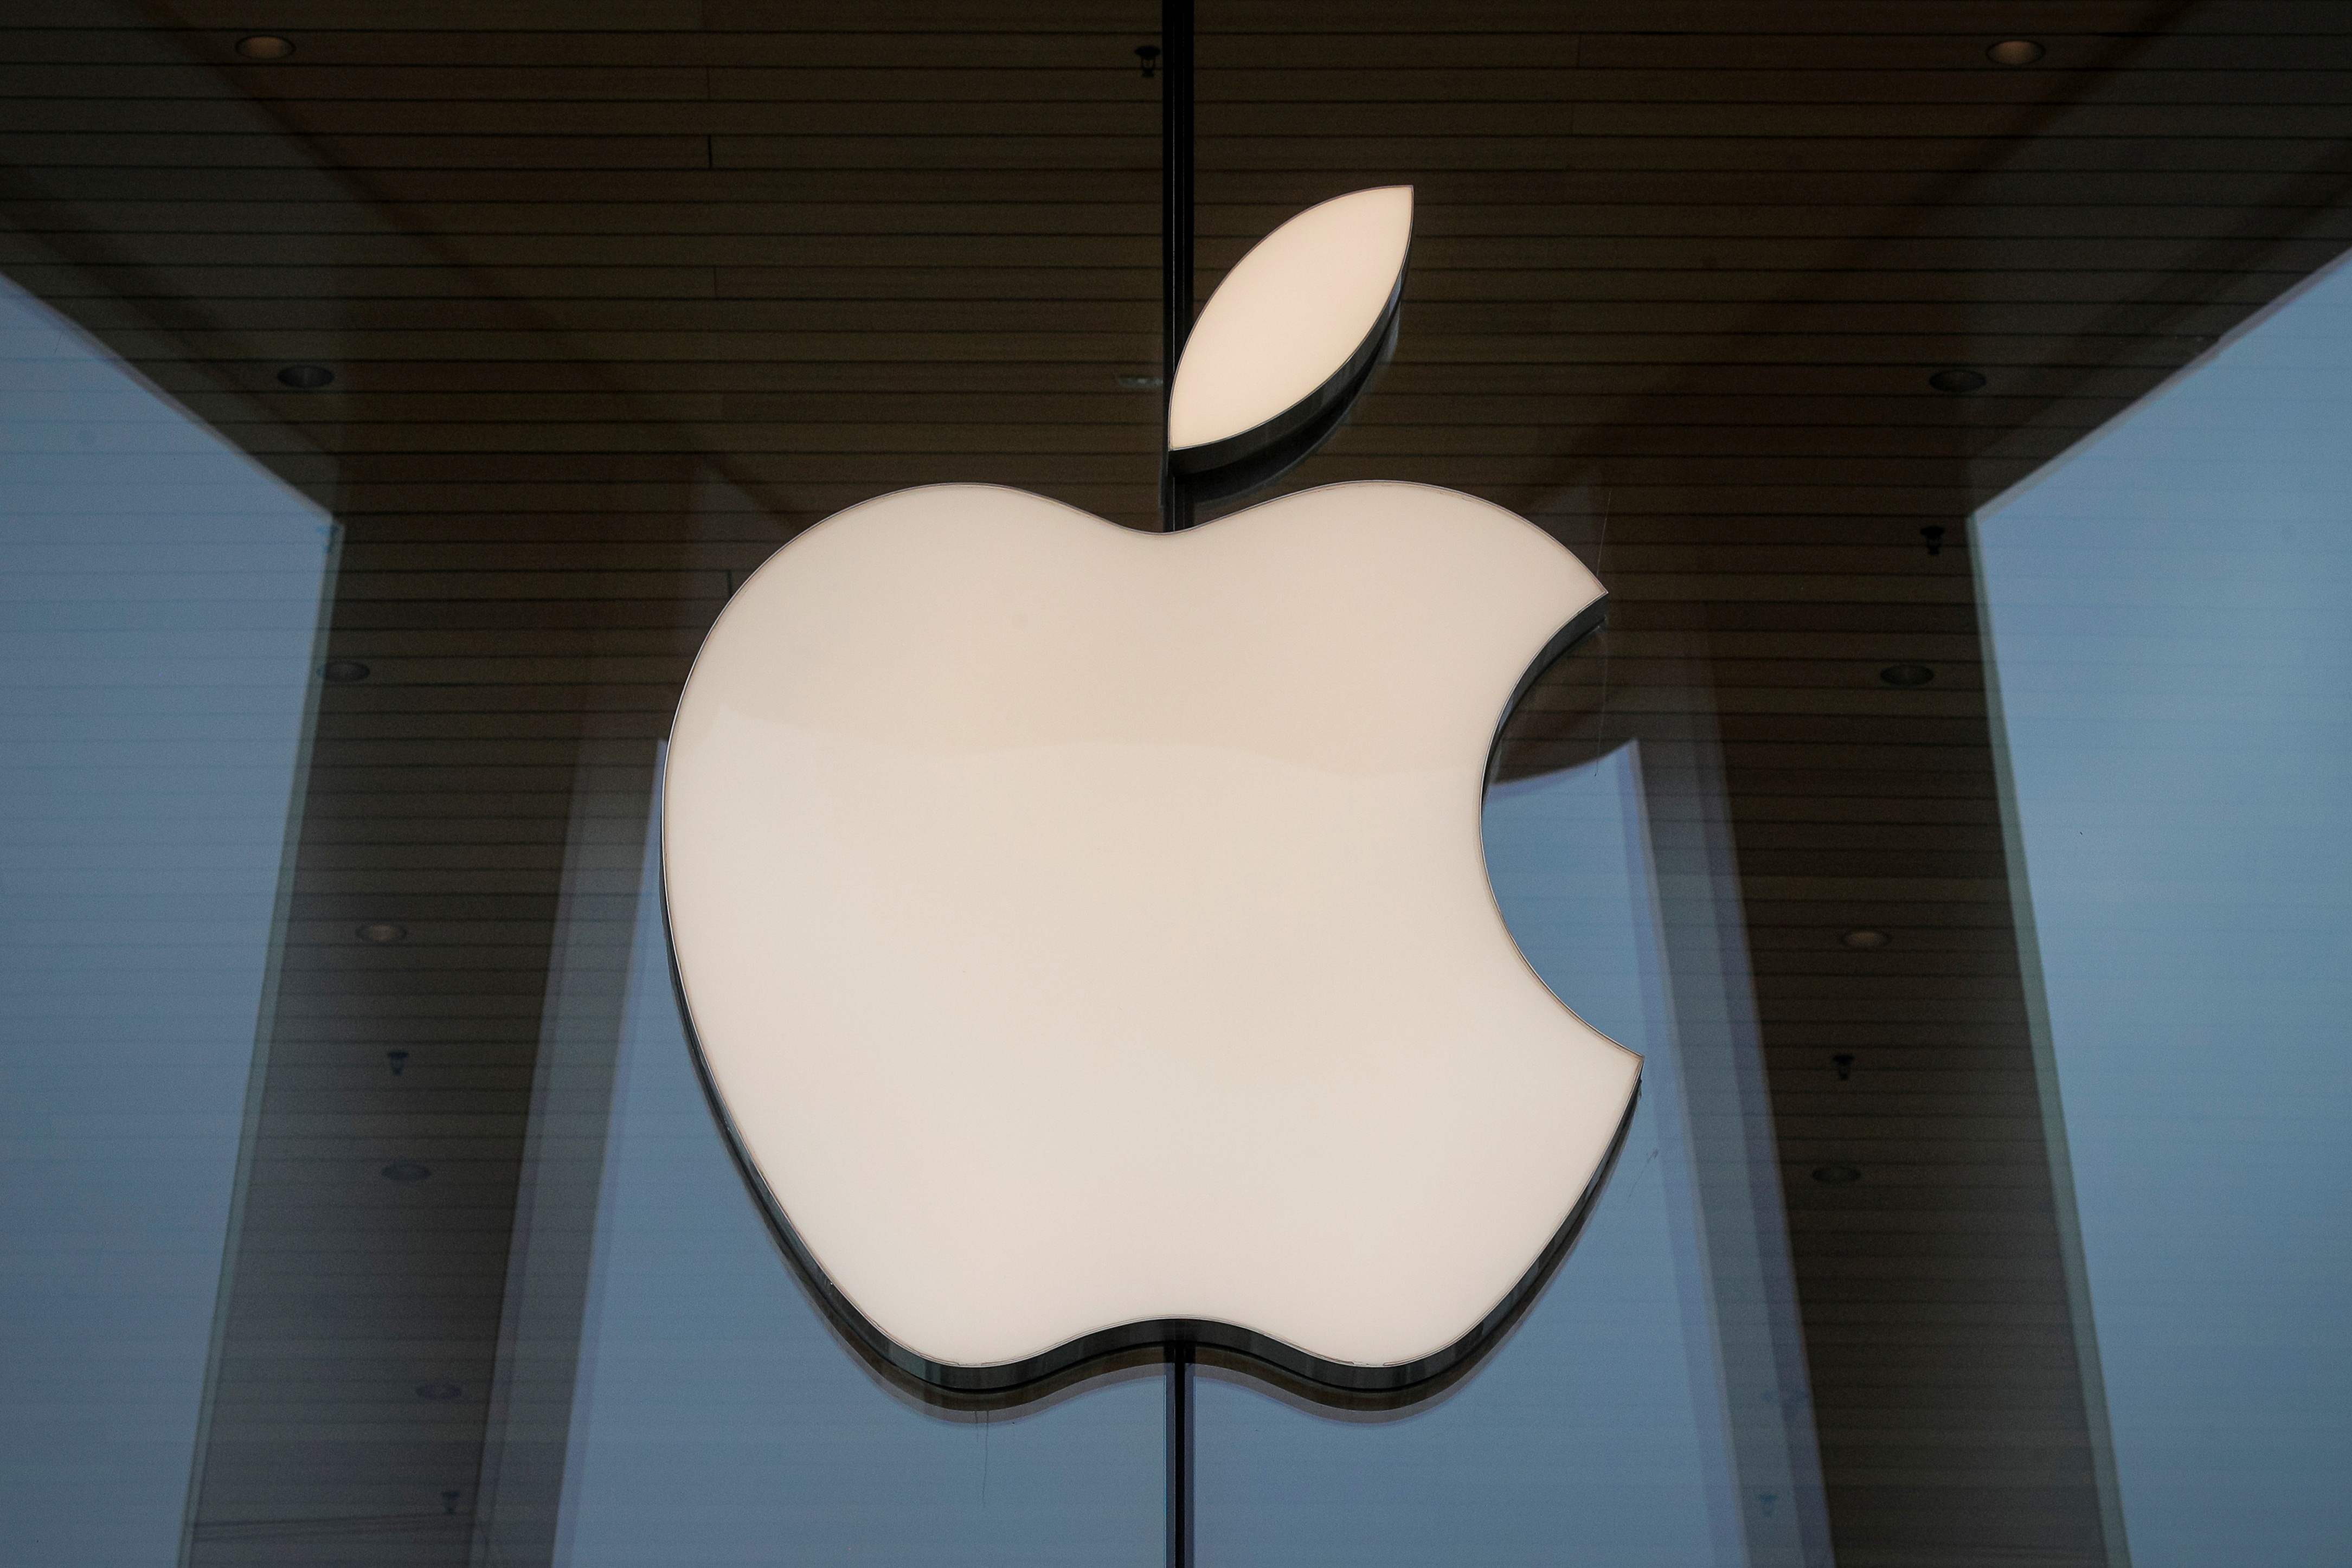 The Apple logo is seen at an Apple Store, as Apple's new 5G iPhone 12 went on sale in Brooklyn, New York